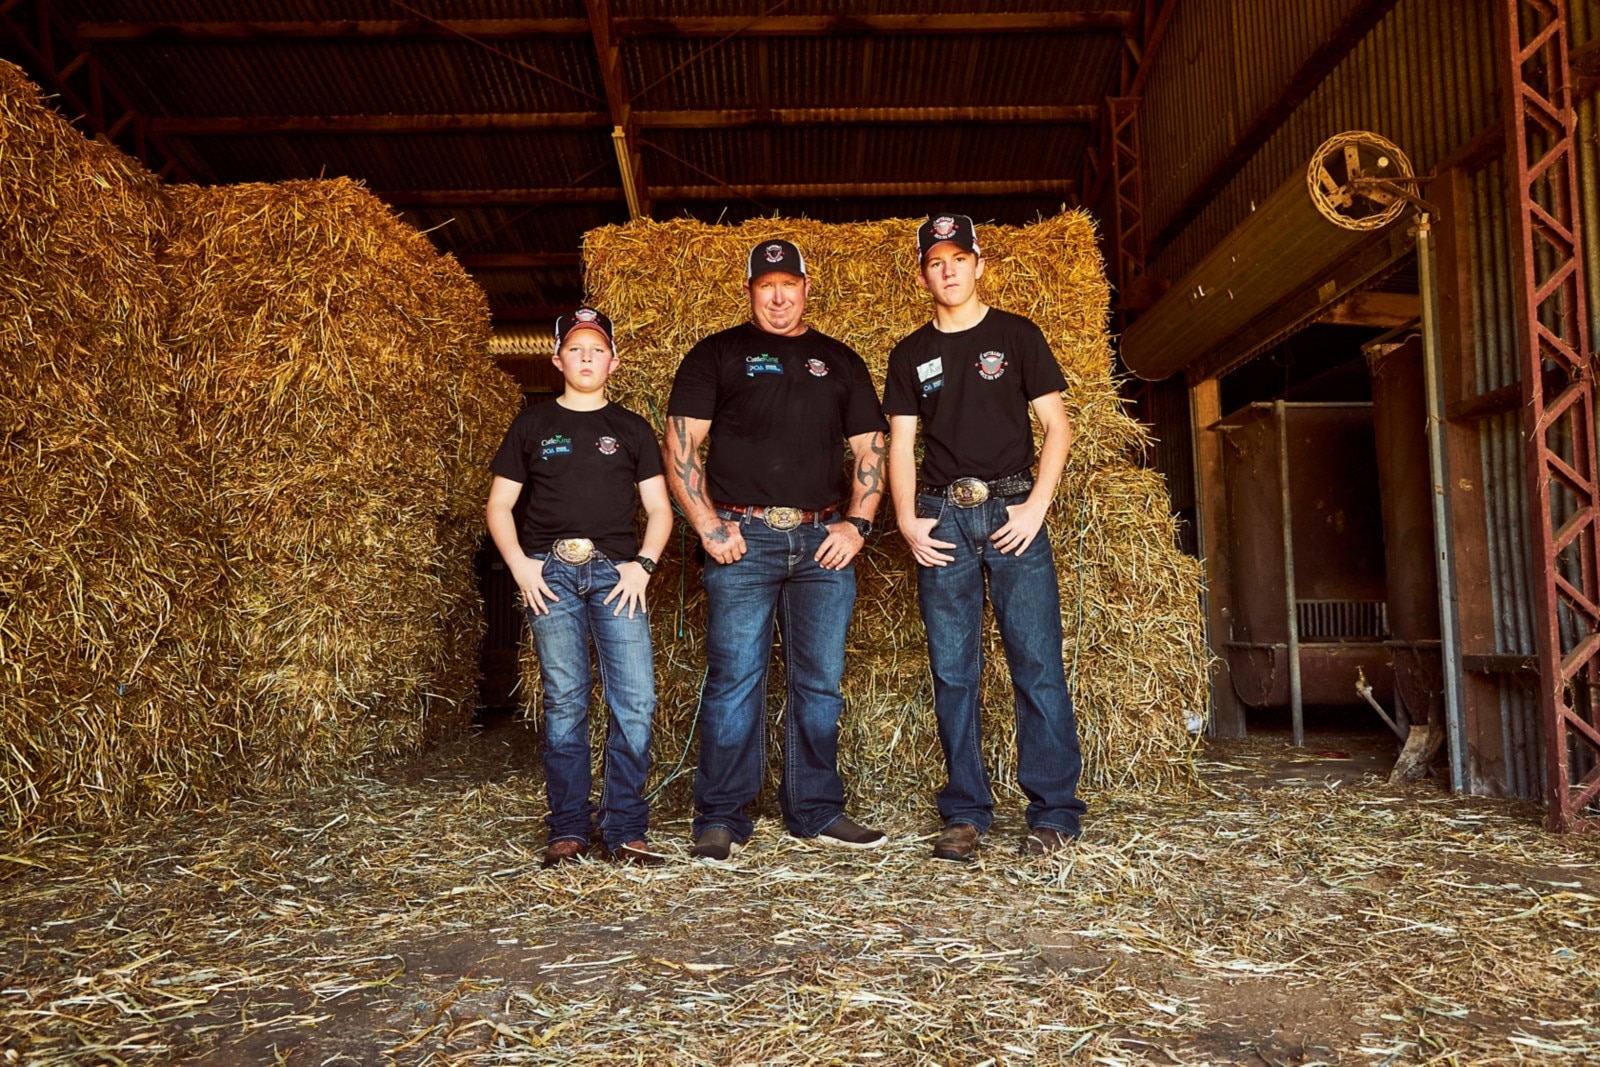 Jason Dittman and his two eldest sons, repping their belt buckles and denim, standing in front of square hay bales